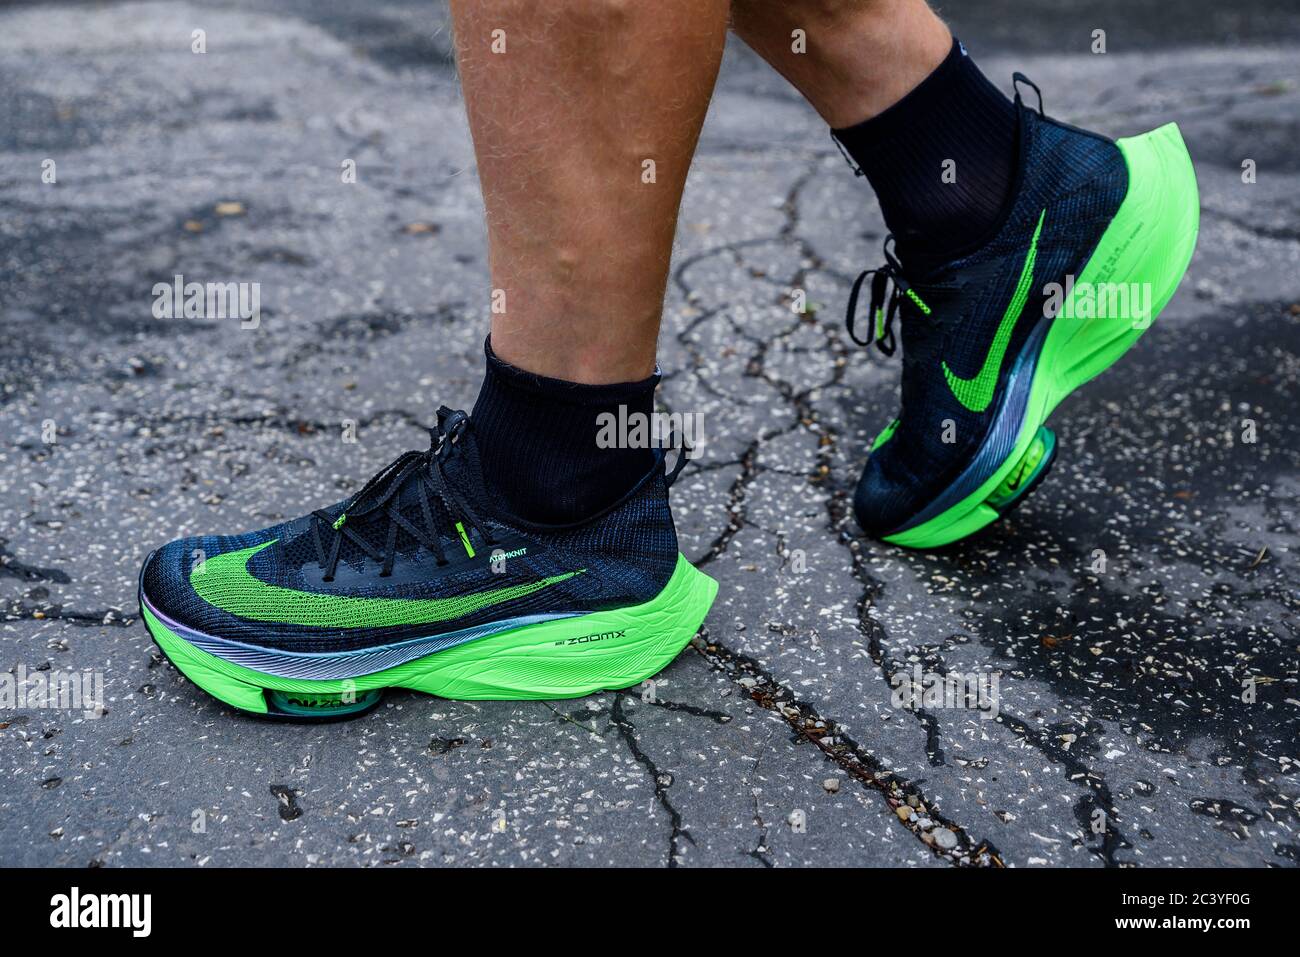 ROME, ITALY, JUNE 23. 2020: Nike running shoes ALPHAFLY NEXT%.  Controversial green athletics shoe on legs of professional athlete running  on the road Stock Photo - Alamy